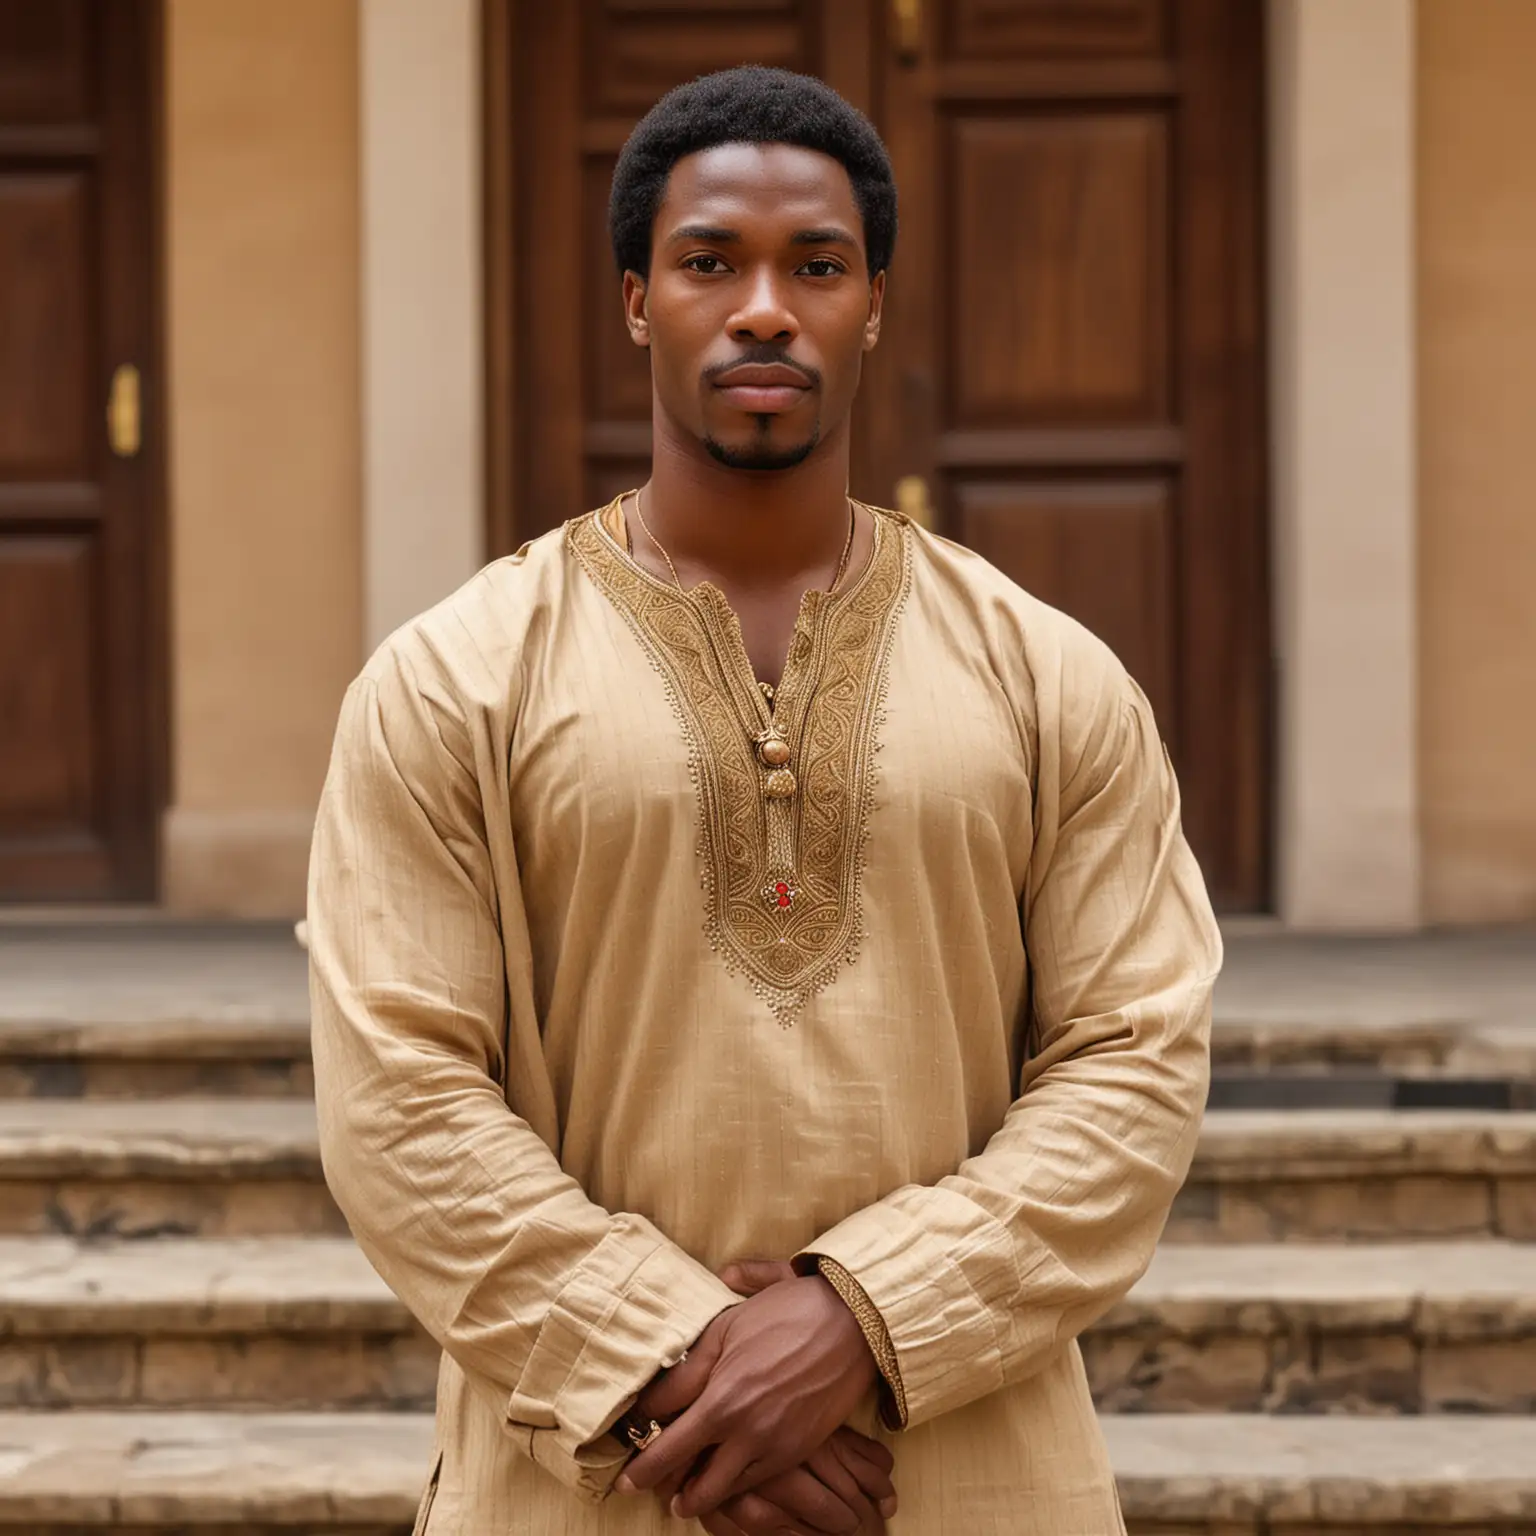 A very handsome, tall, waell built, wise looking thirty-something African Prince with expressive light brown eyes, deep dimples, lucious thick lips, arms folded across his chest, front view, wise, looking, dressed in casual, cultural outfit, with smooth brown real skin color, natural brown hair, standing on the steps of a palace